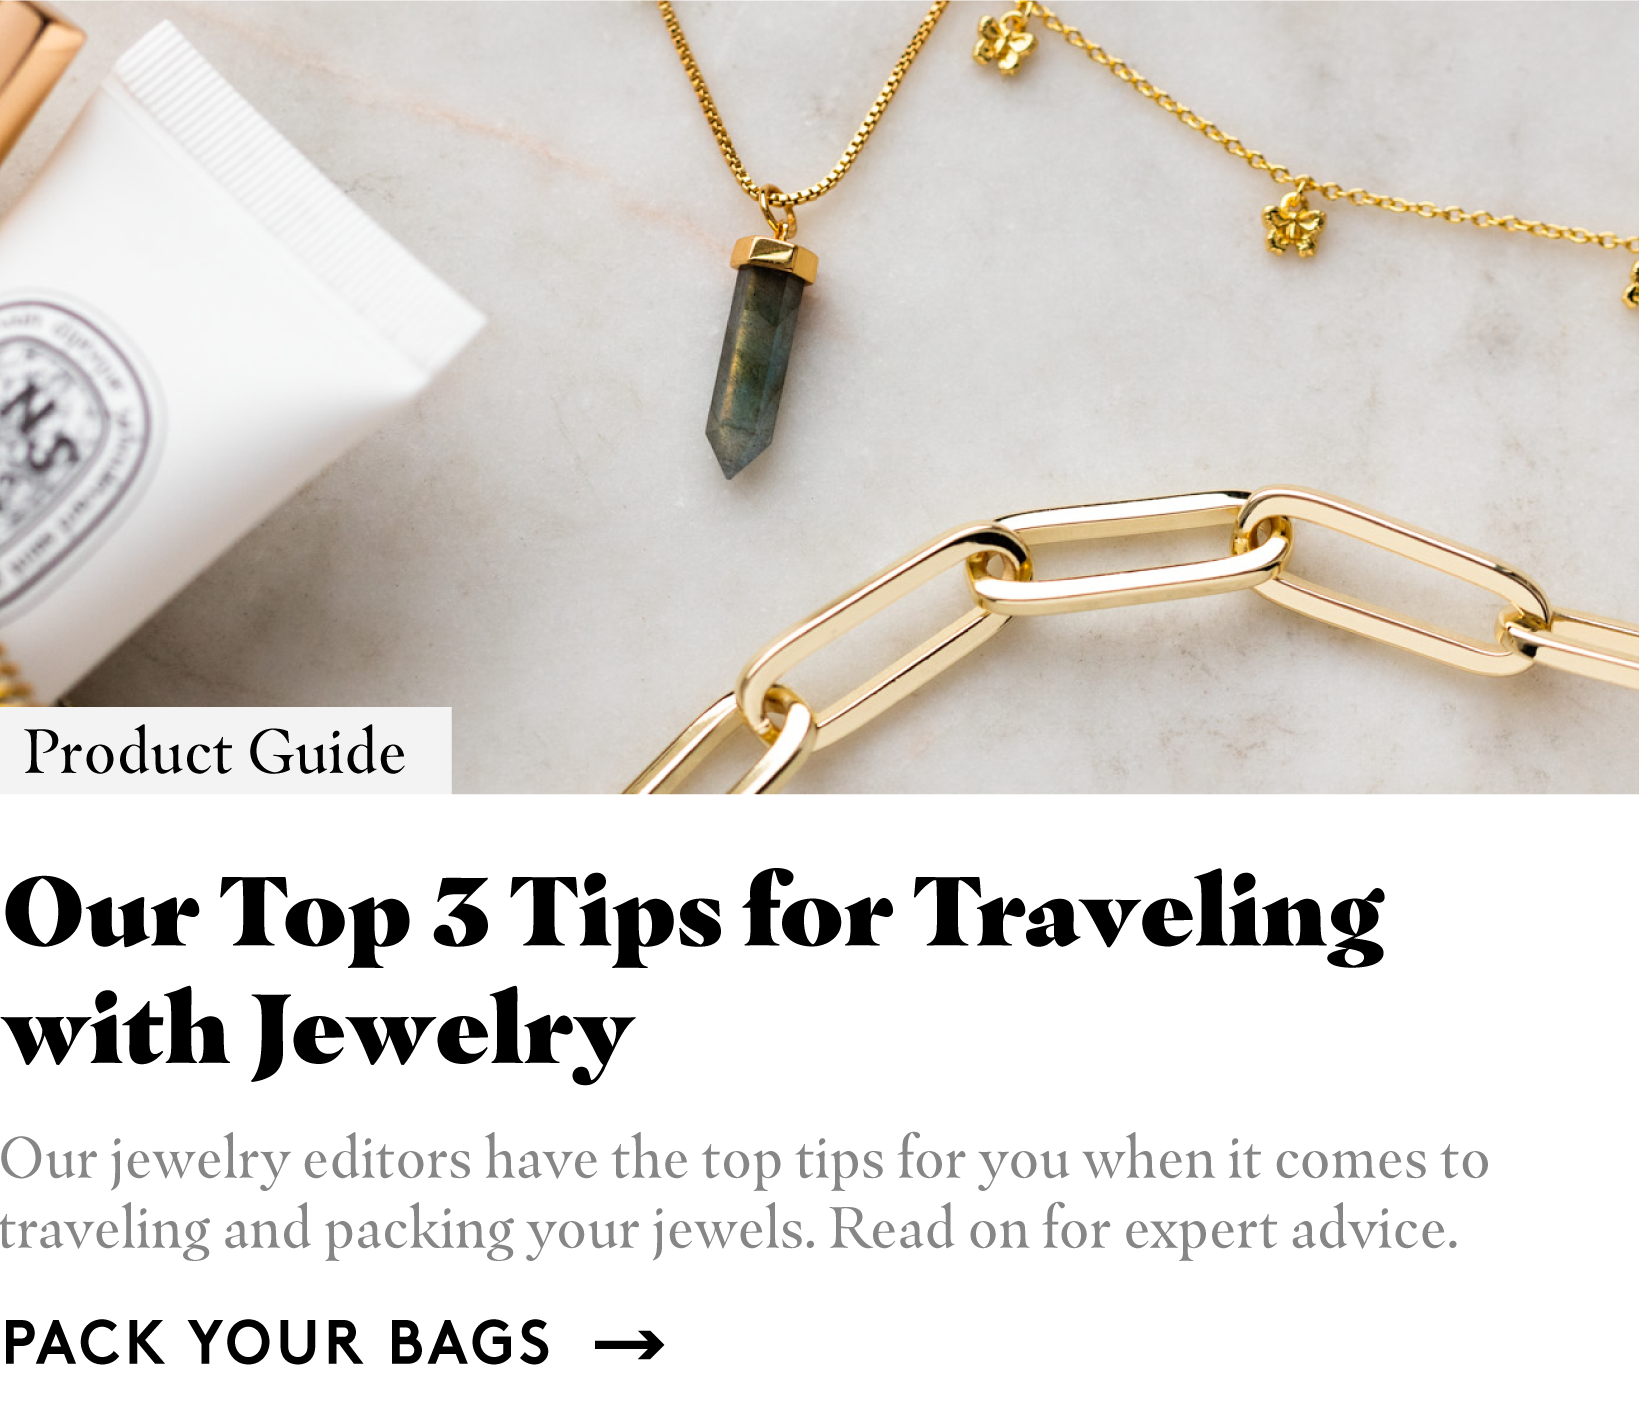 Our Top 3 Tips for Traveling with Jewelry